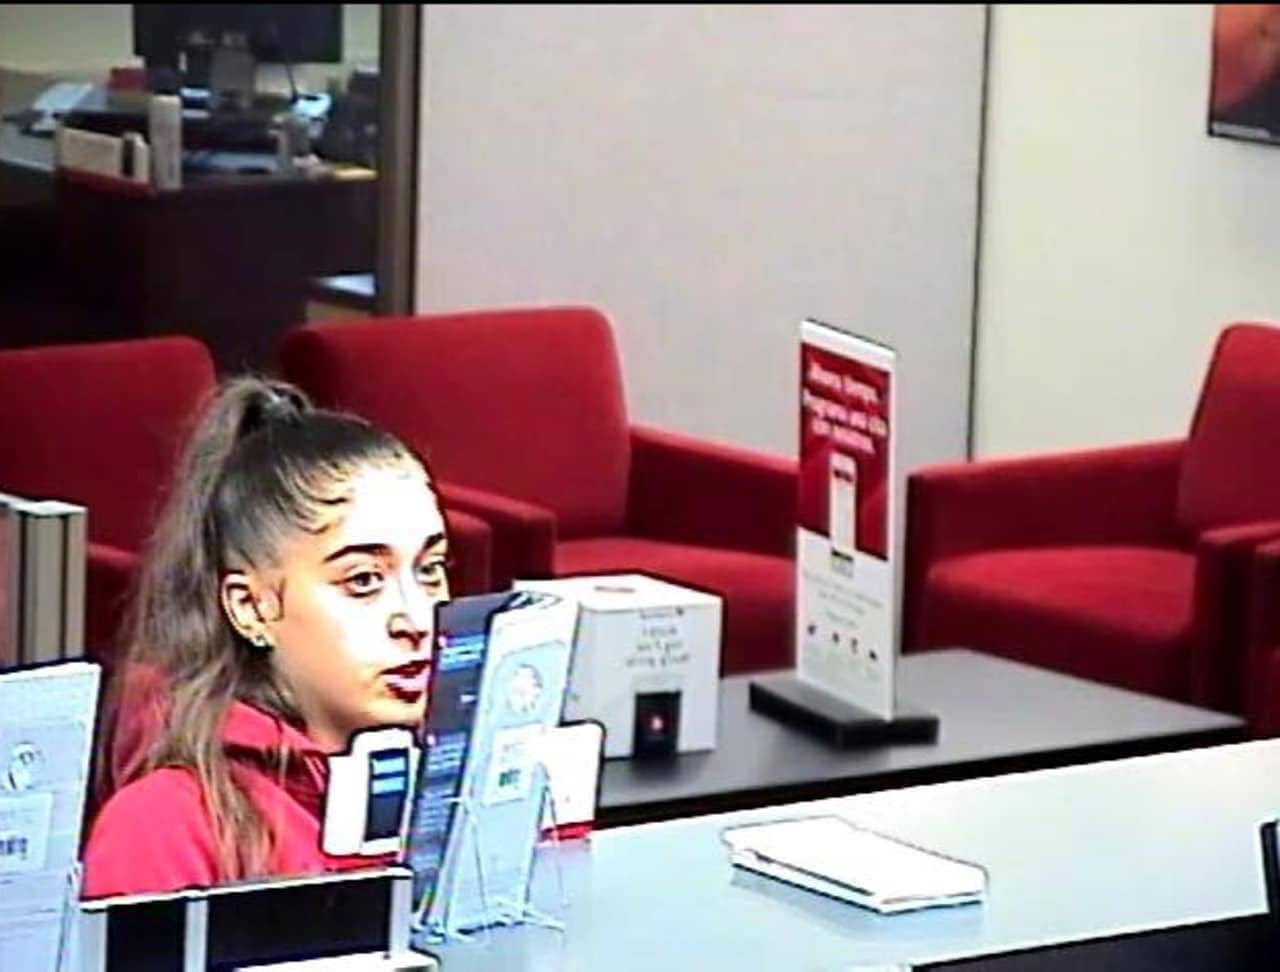 A look at the suspect seen picking up a wallet at the Bank of America on Post Road in Westport.